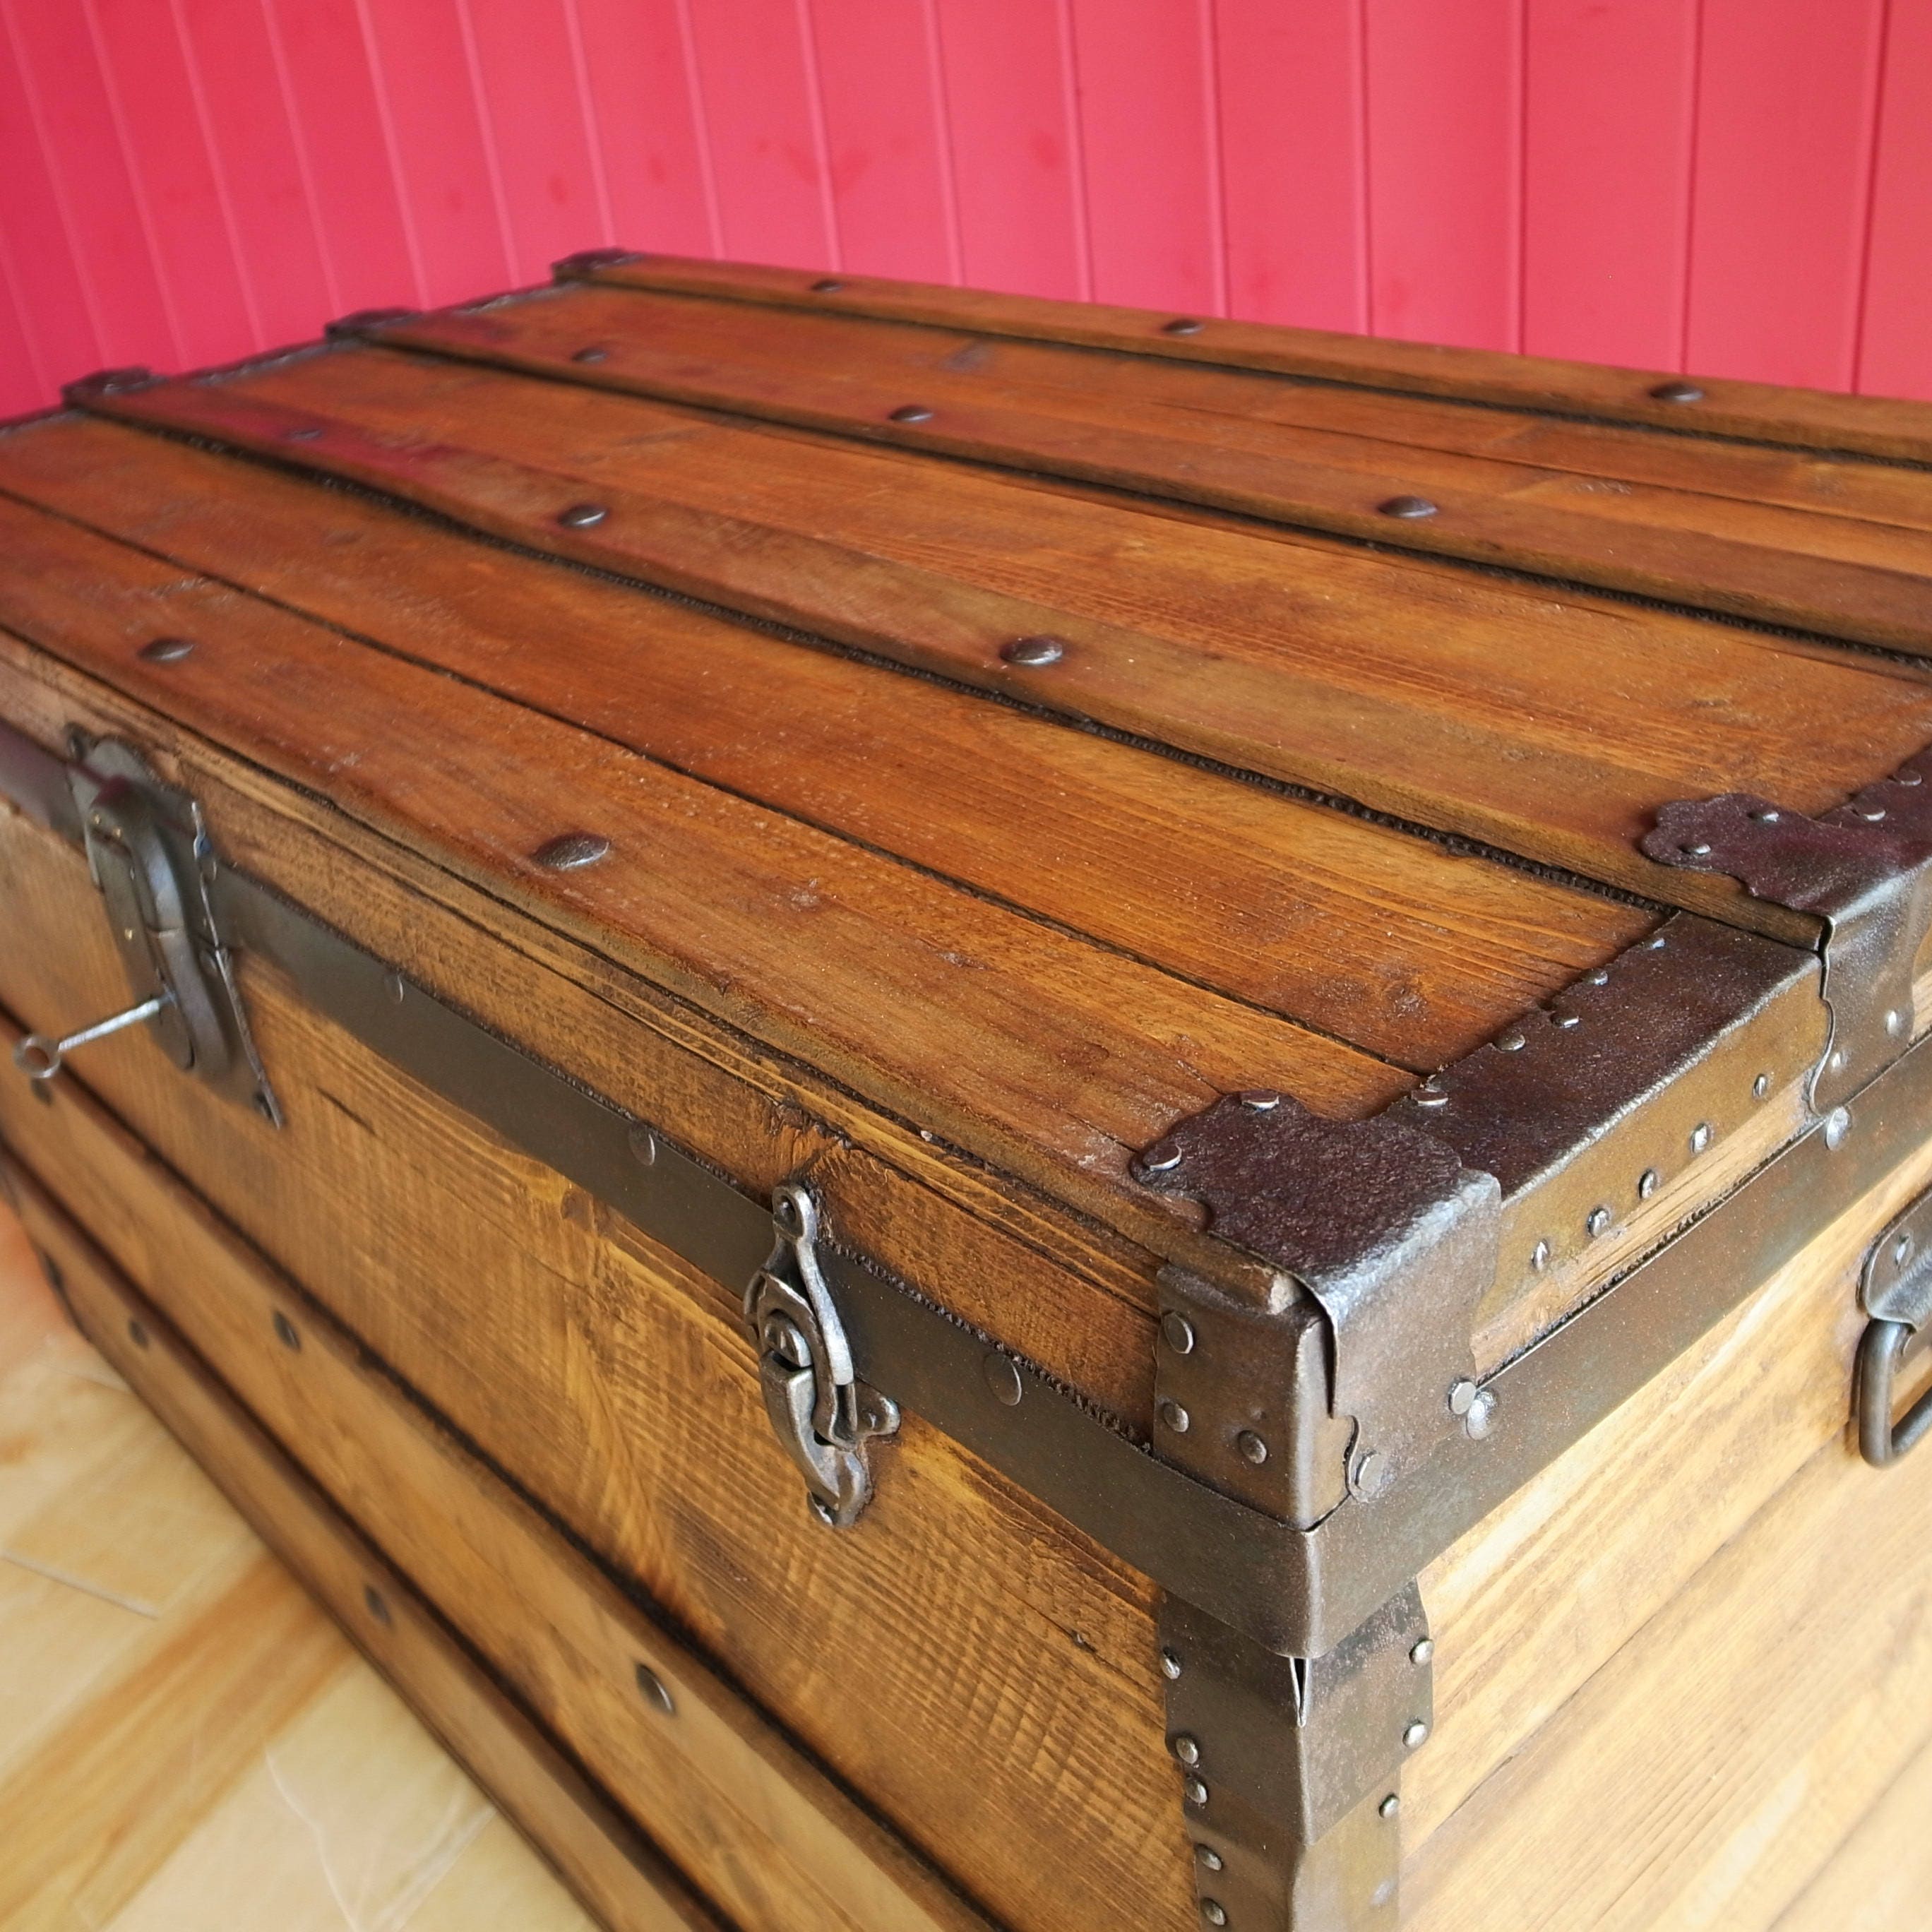 VINTAGE STEAMER TRUNK Coffee Table Storage Chest Old ...